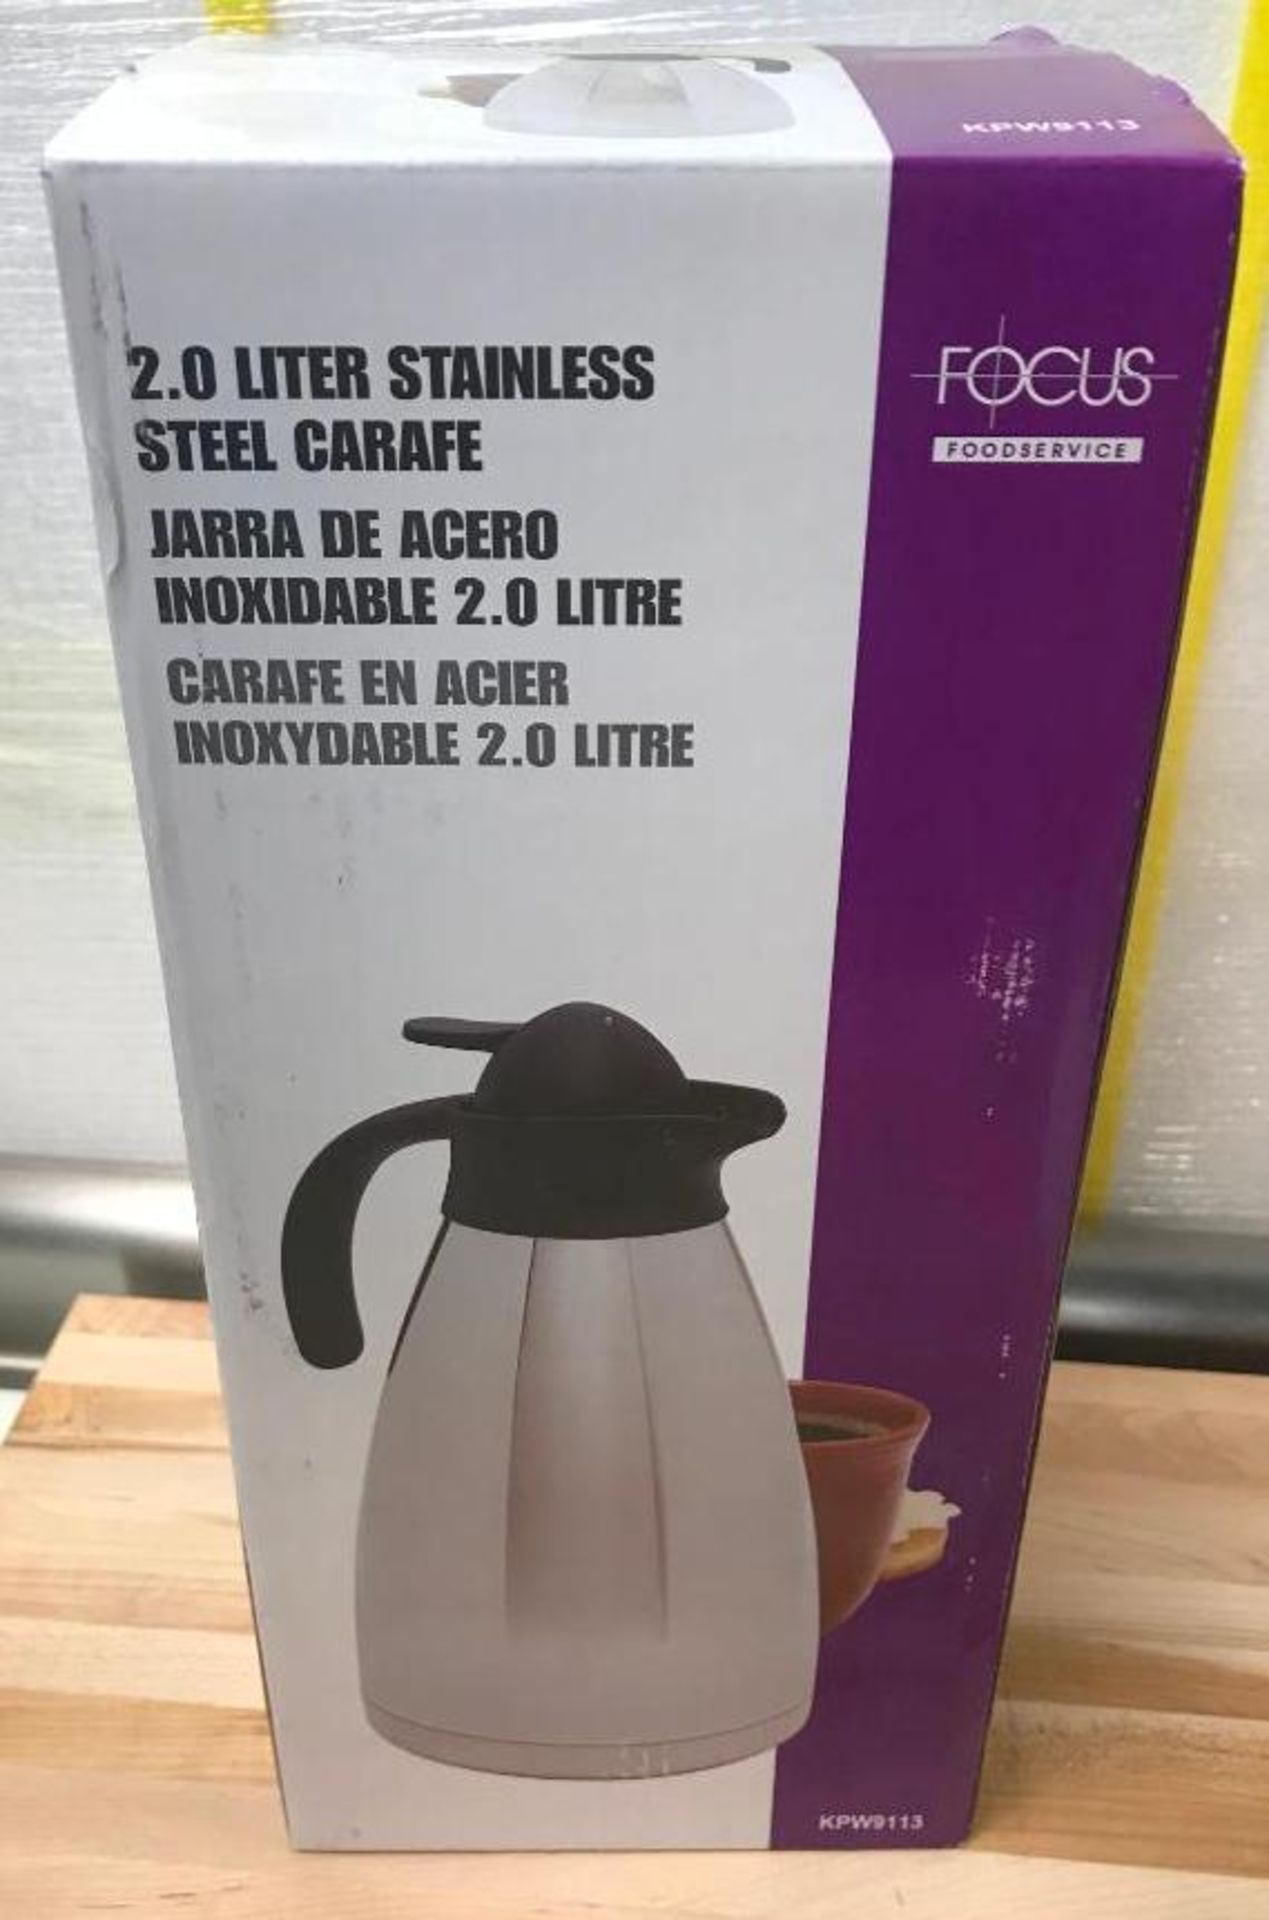 2 LITER STAINLESS STEEL CARAFE - HOT AND COLD SERVER - FOCUS KPW9113 - NEW - Image 2 of 2